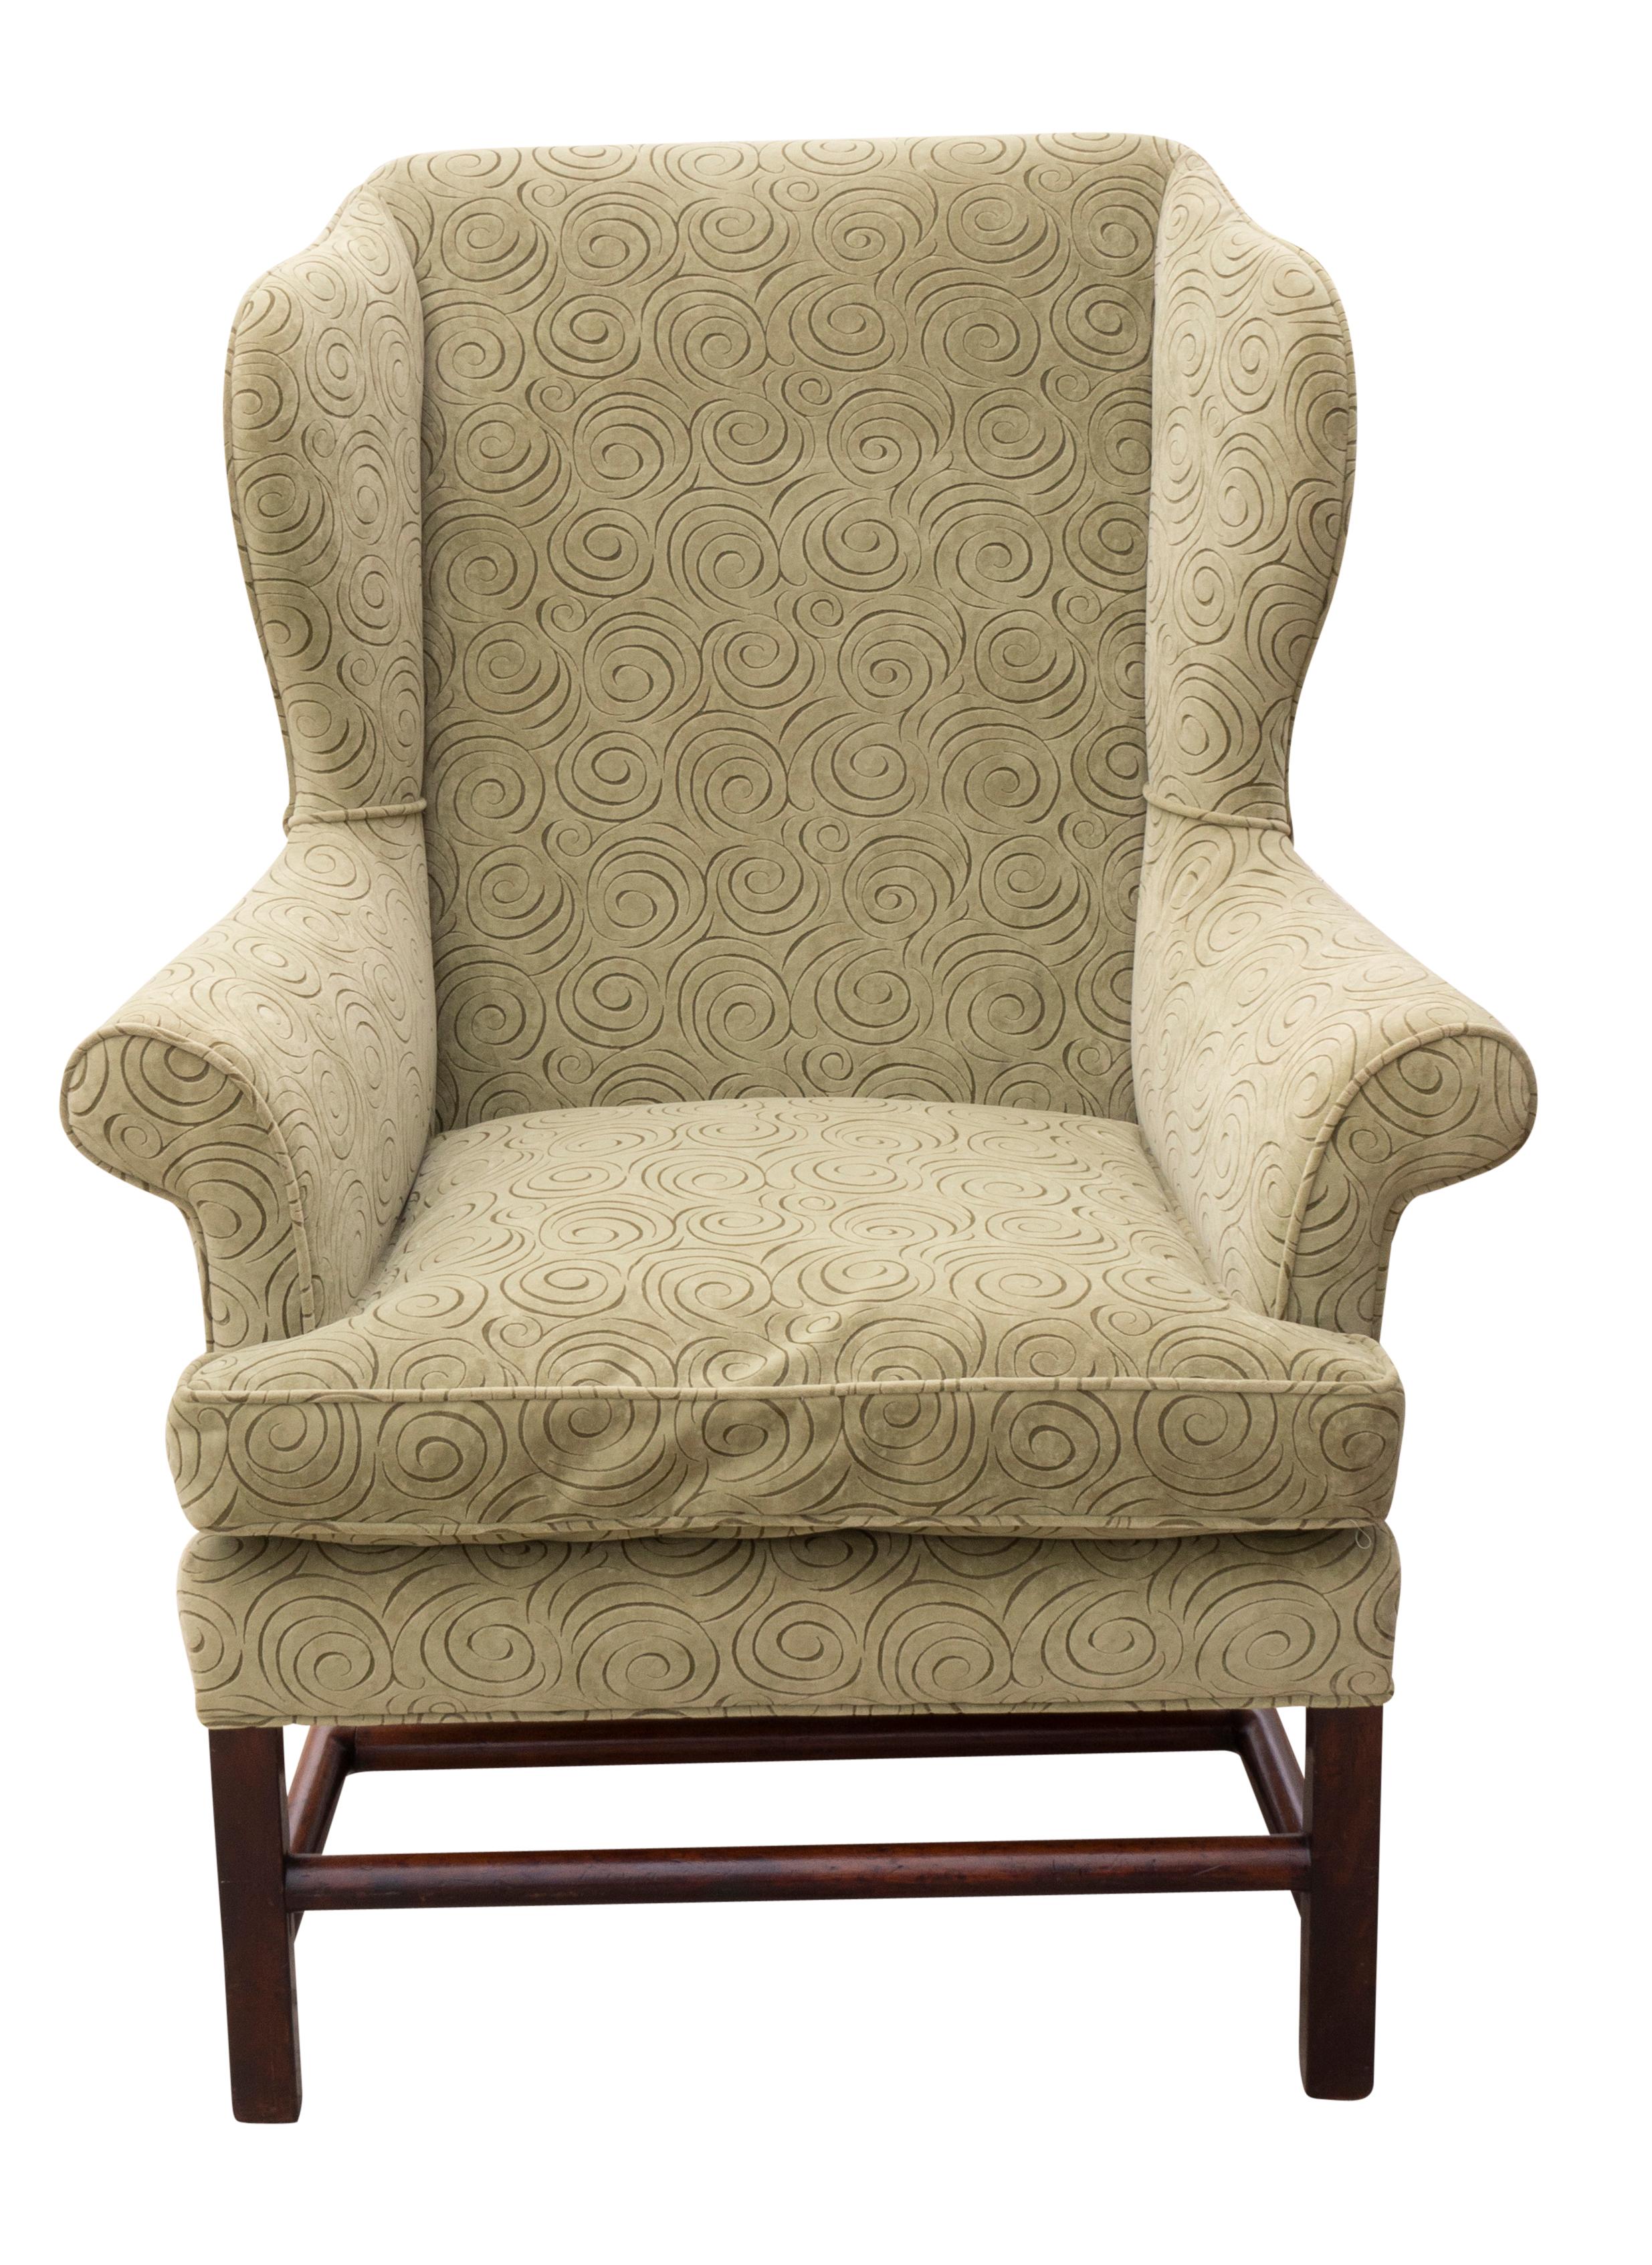 Typical form with atypical cylindrical stretchers. Square tapered legs. Upholstery in good condition.